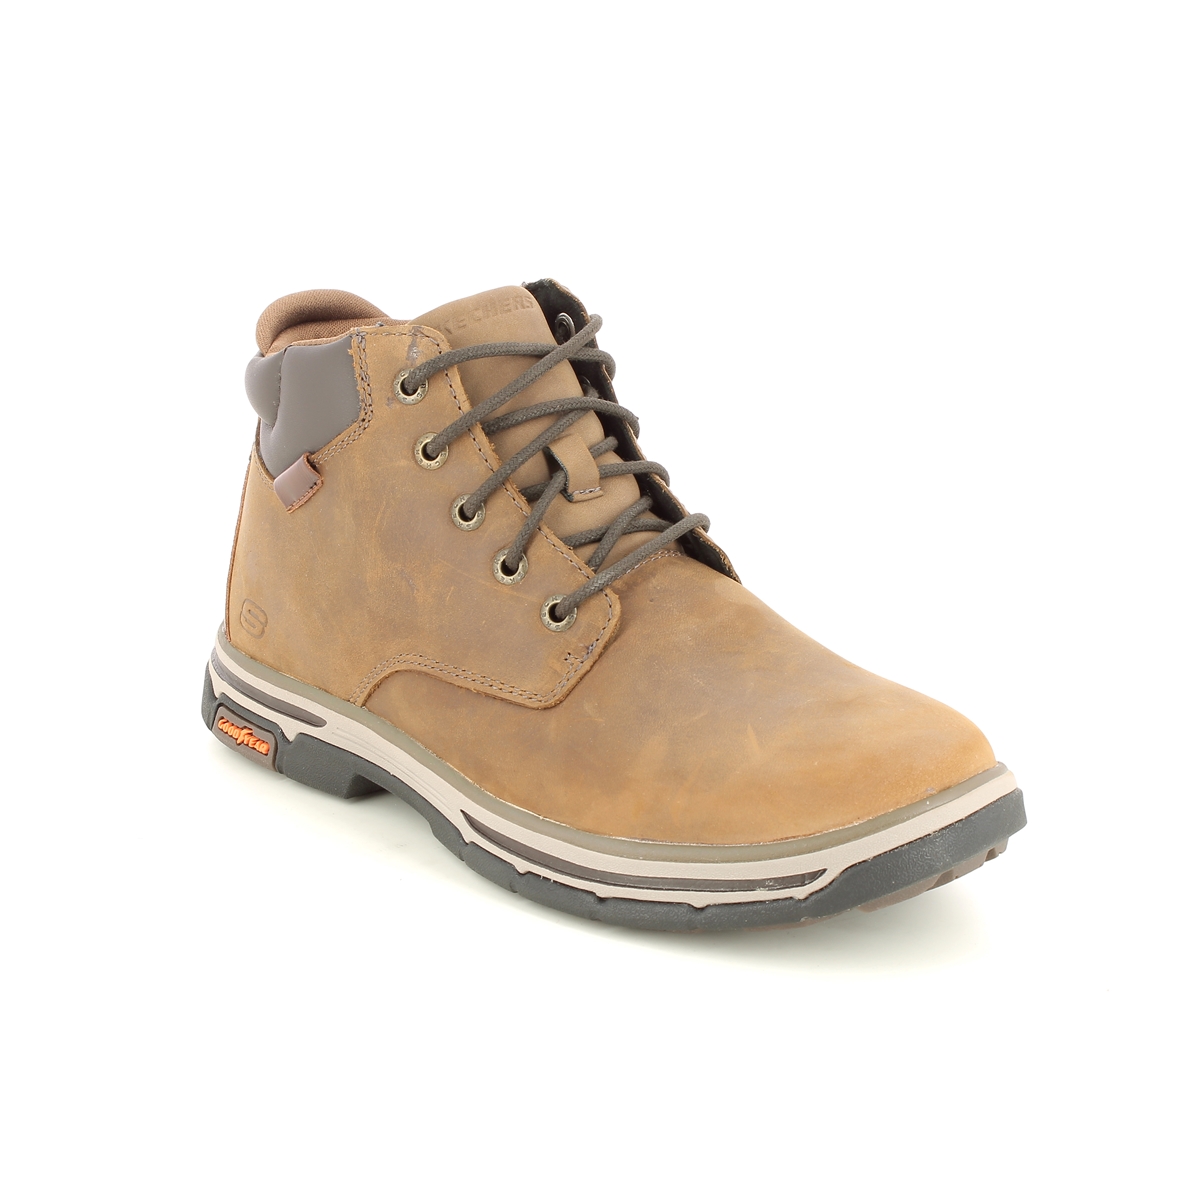 Skechers Segment 2.0 Relaxed DSCH Brown Mens Chukka Boots 204394 in a Plain Leather in Size 9